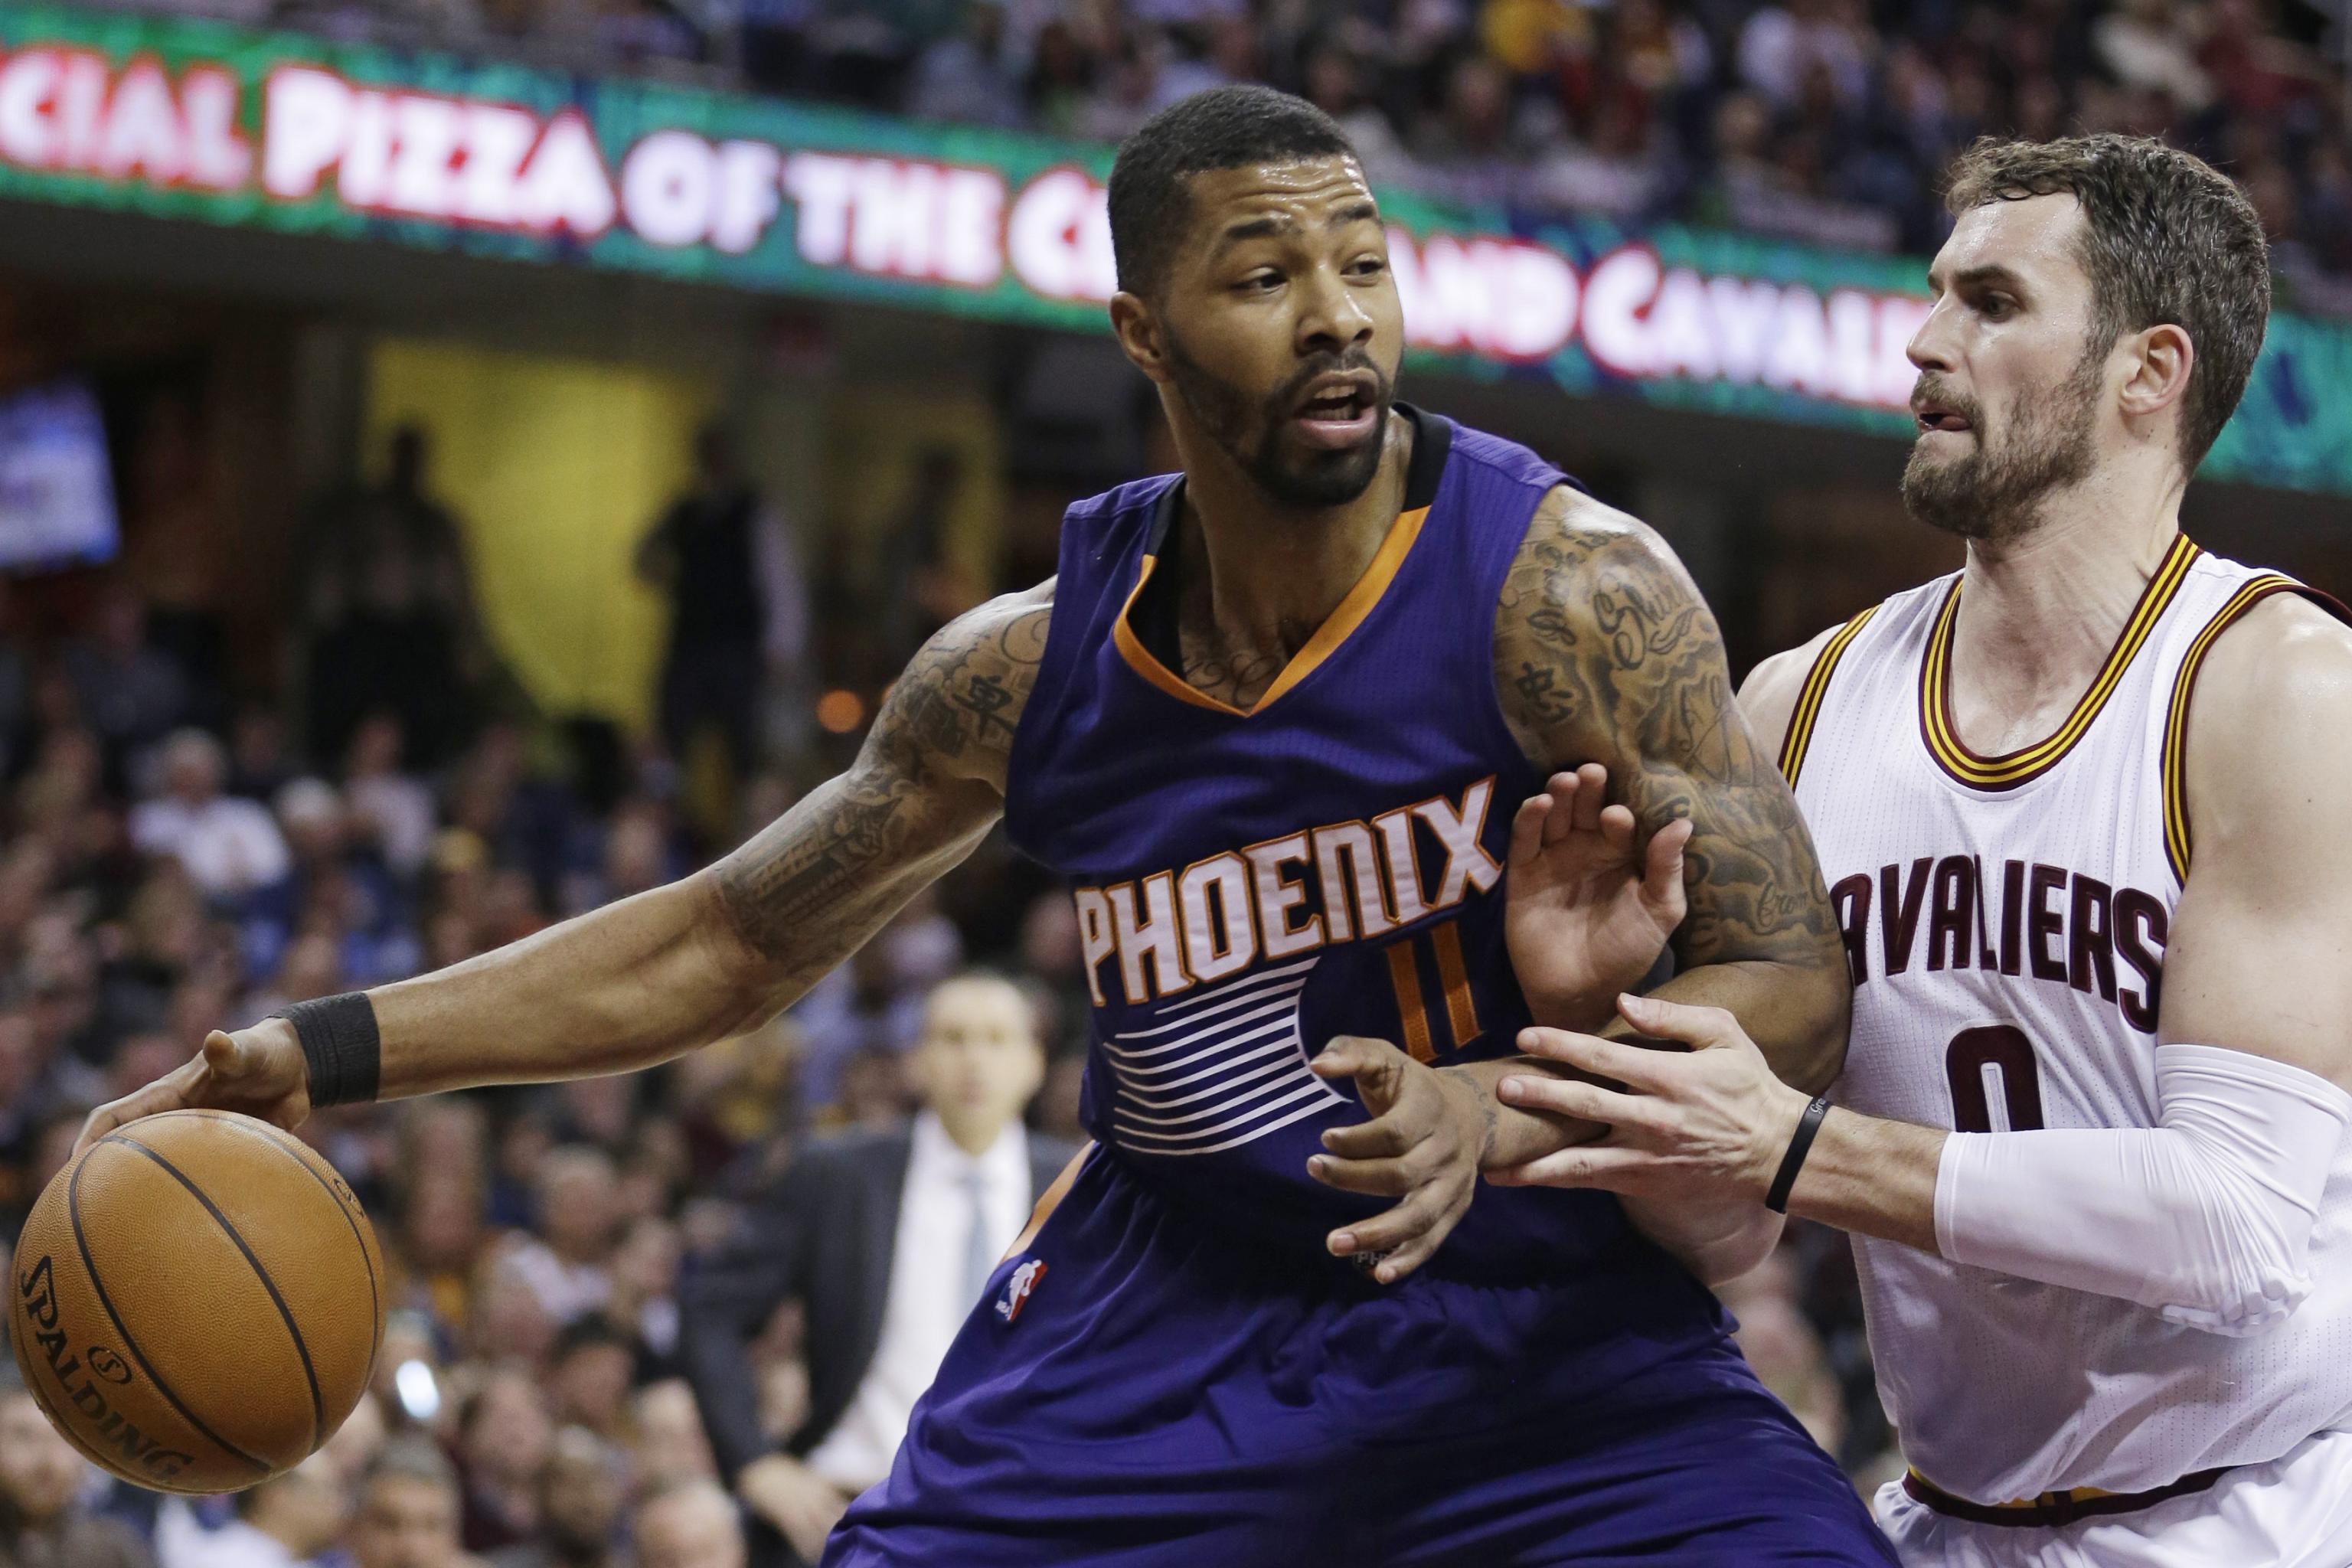 Suns Sign Marcus and Markieff Morris to Extensions